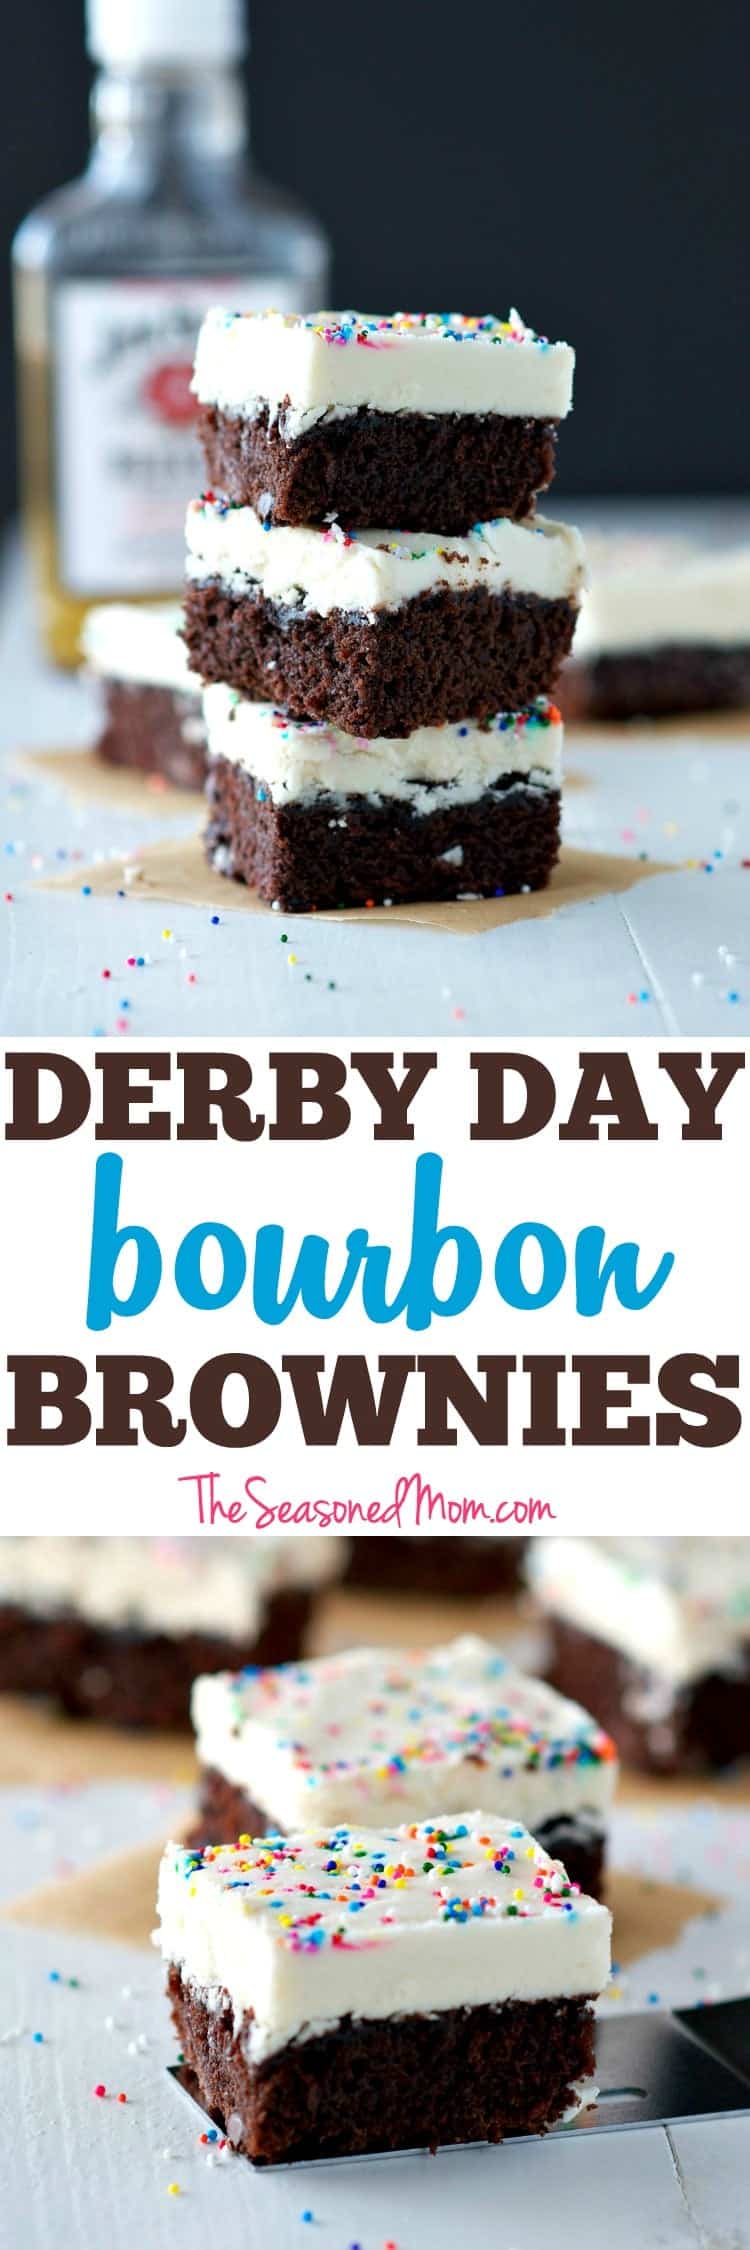 Derby Day Bourbon Brownies image